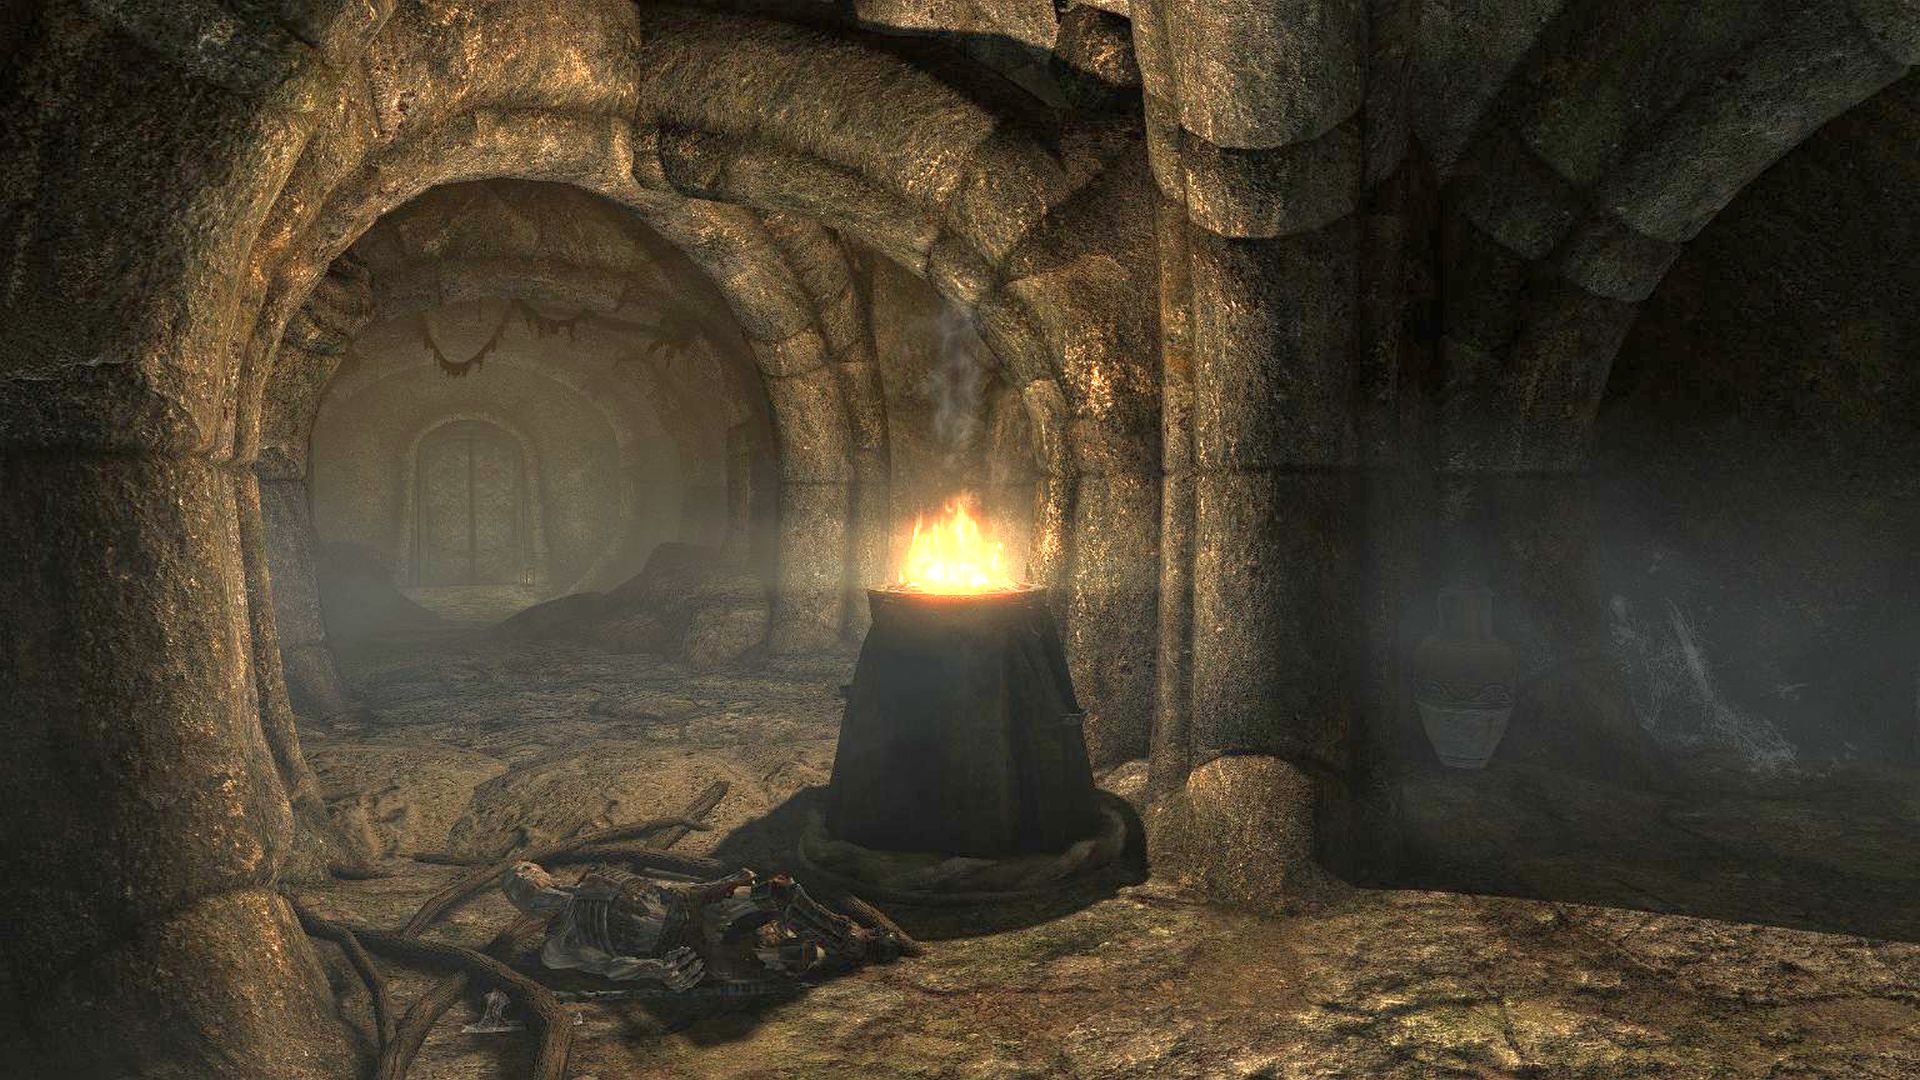 A Skyrim modder is enhancing its dungeons and doubling their sizes